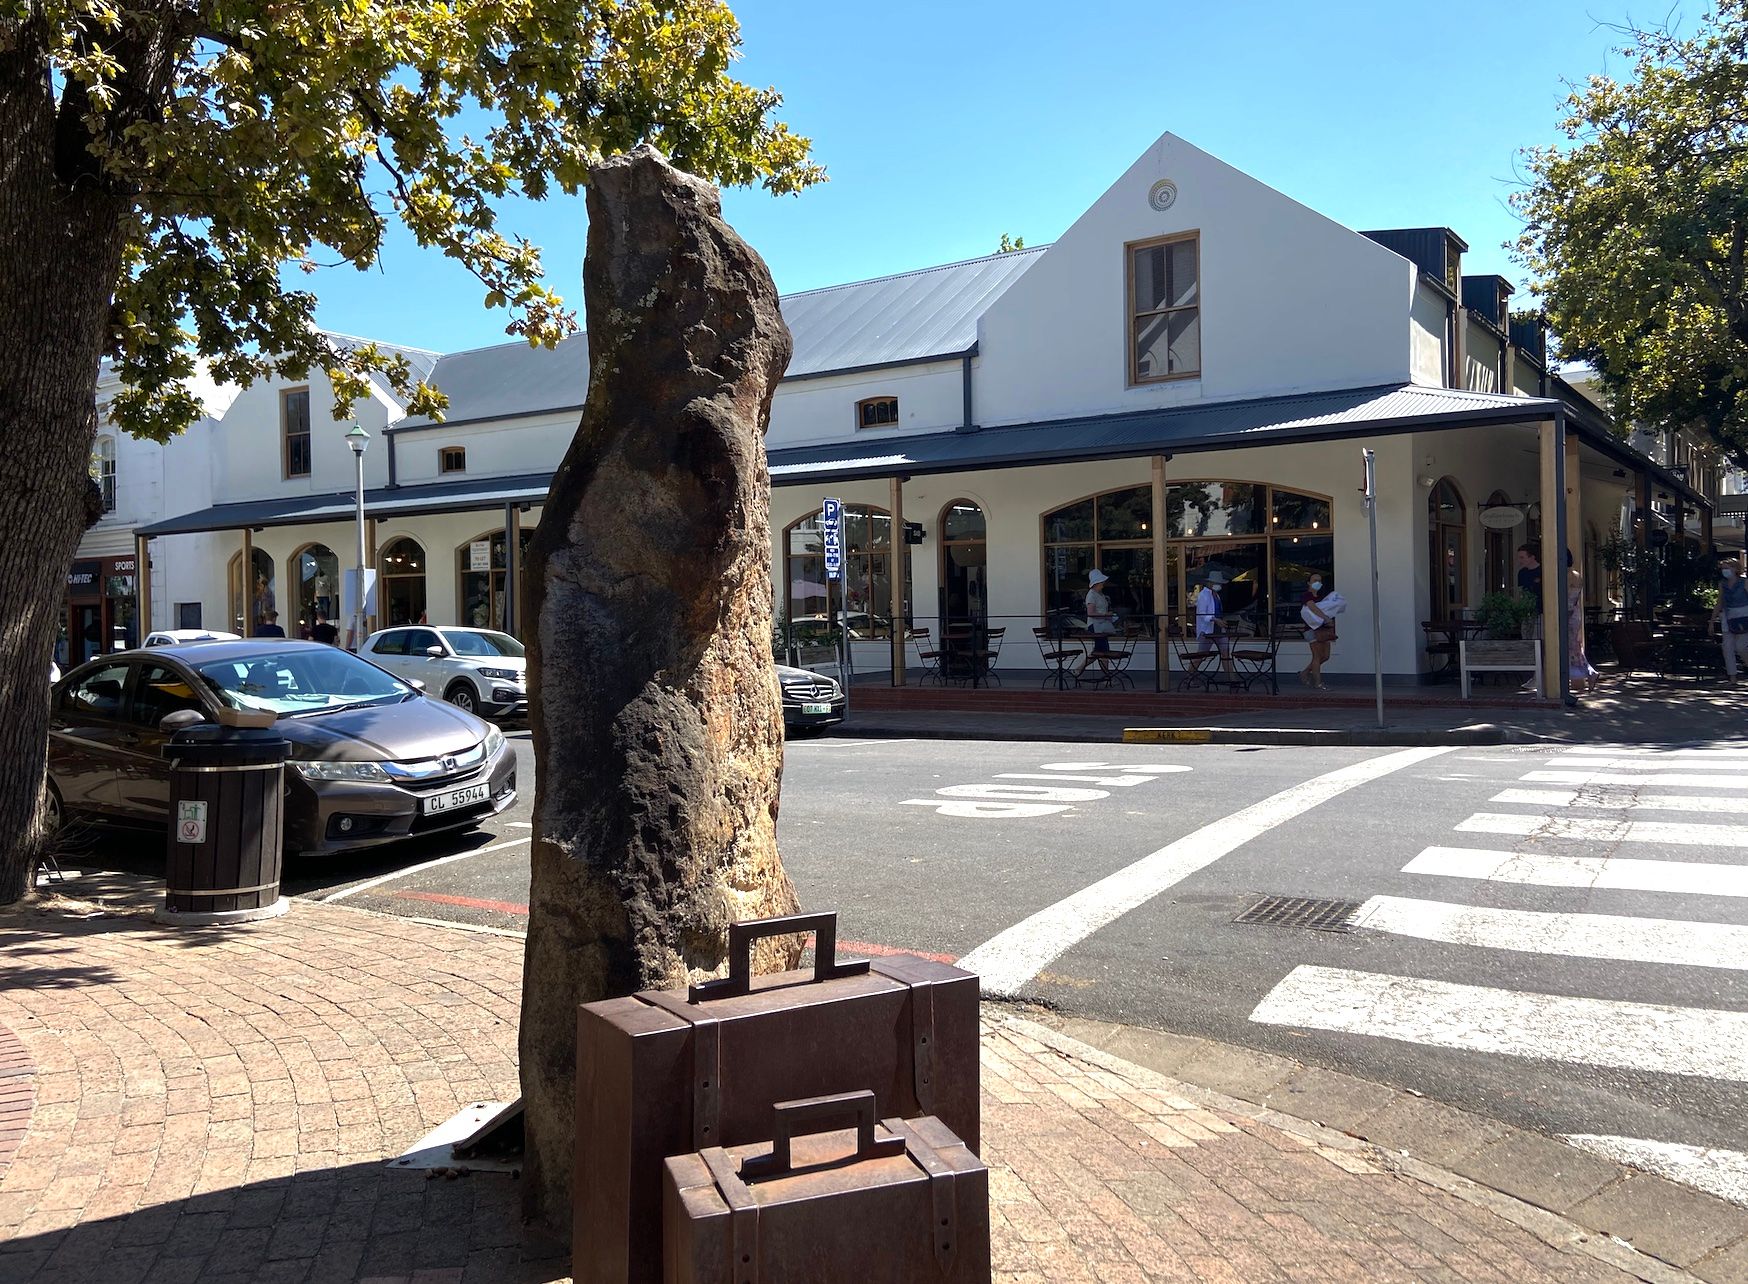 Stellenbosch & the power of wine and tourism working together